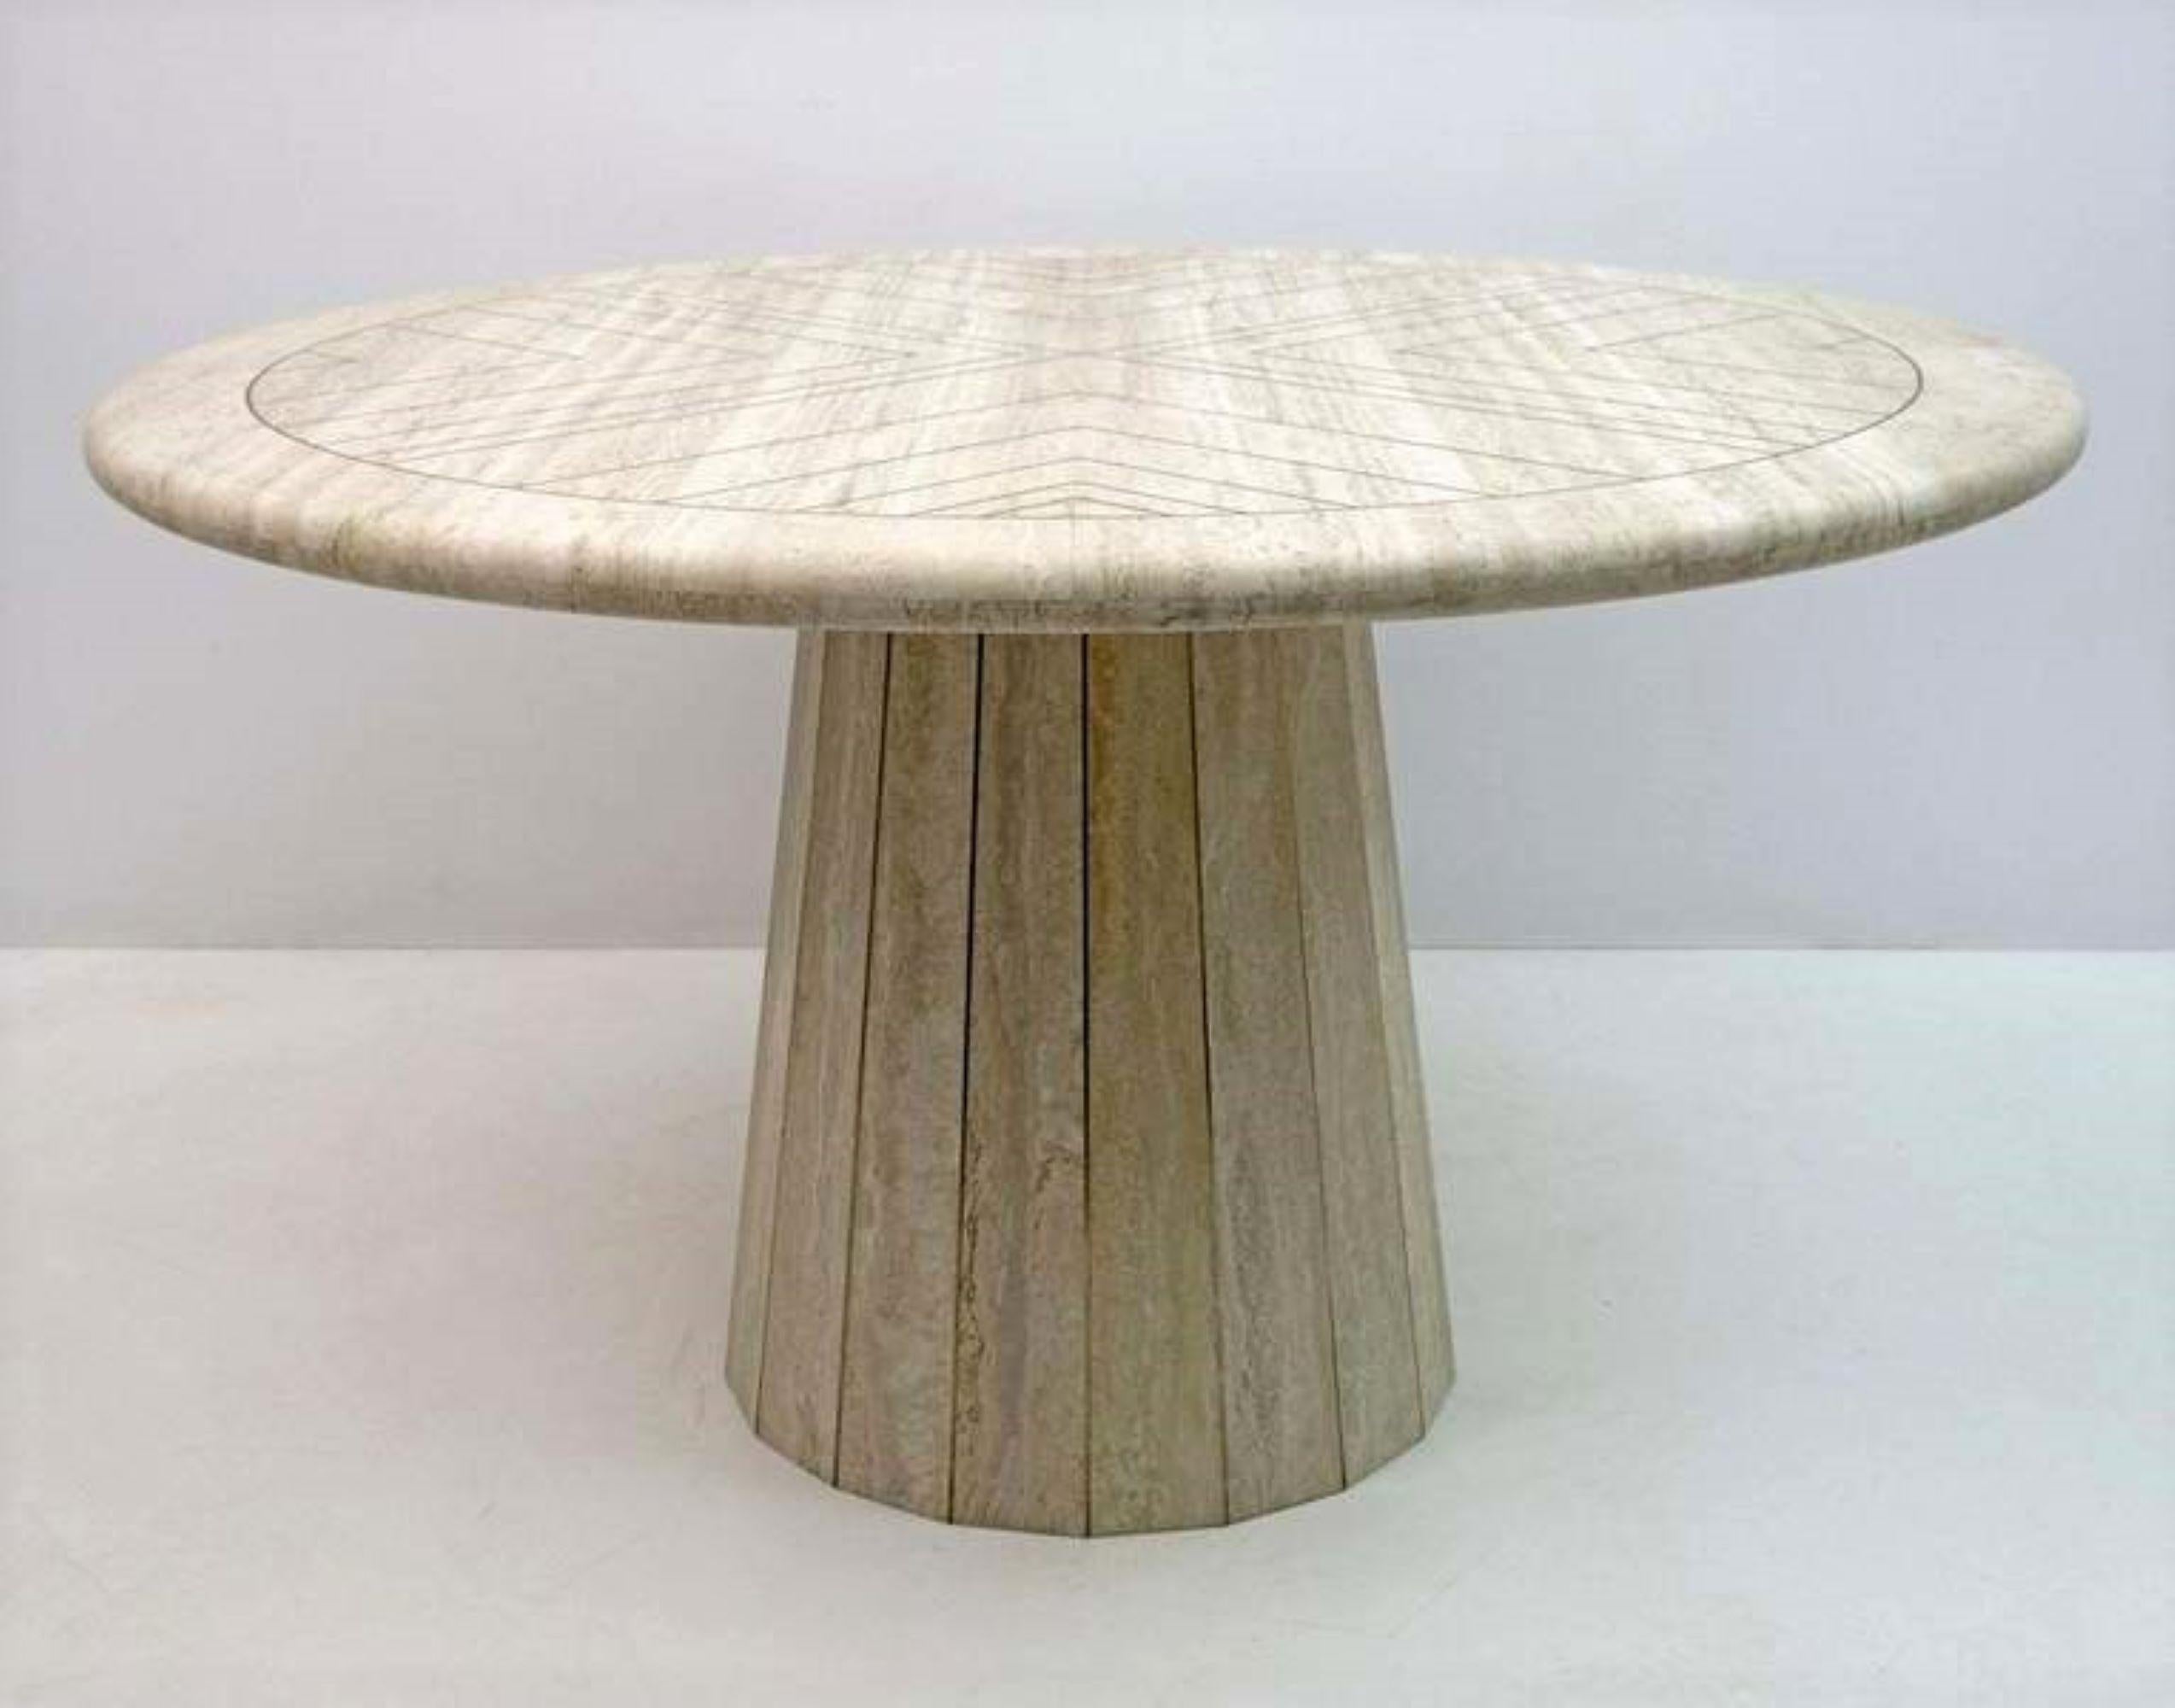 Midcentury Travertine Round Dining Table Attributed to Willy Rizzo, Italian, 70s For Sale 1